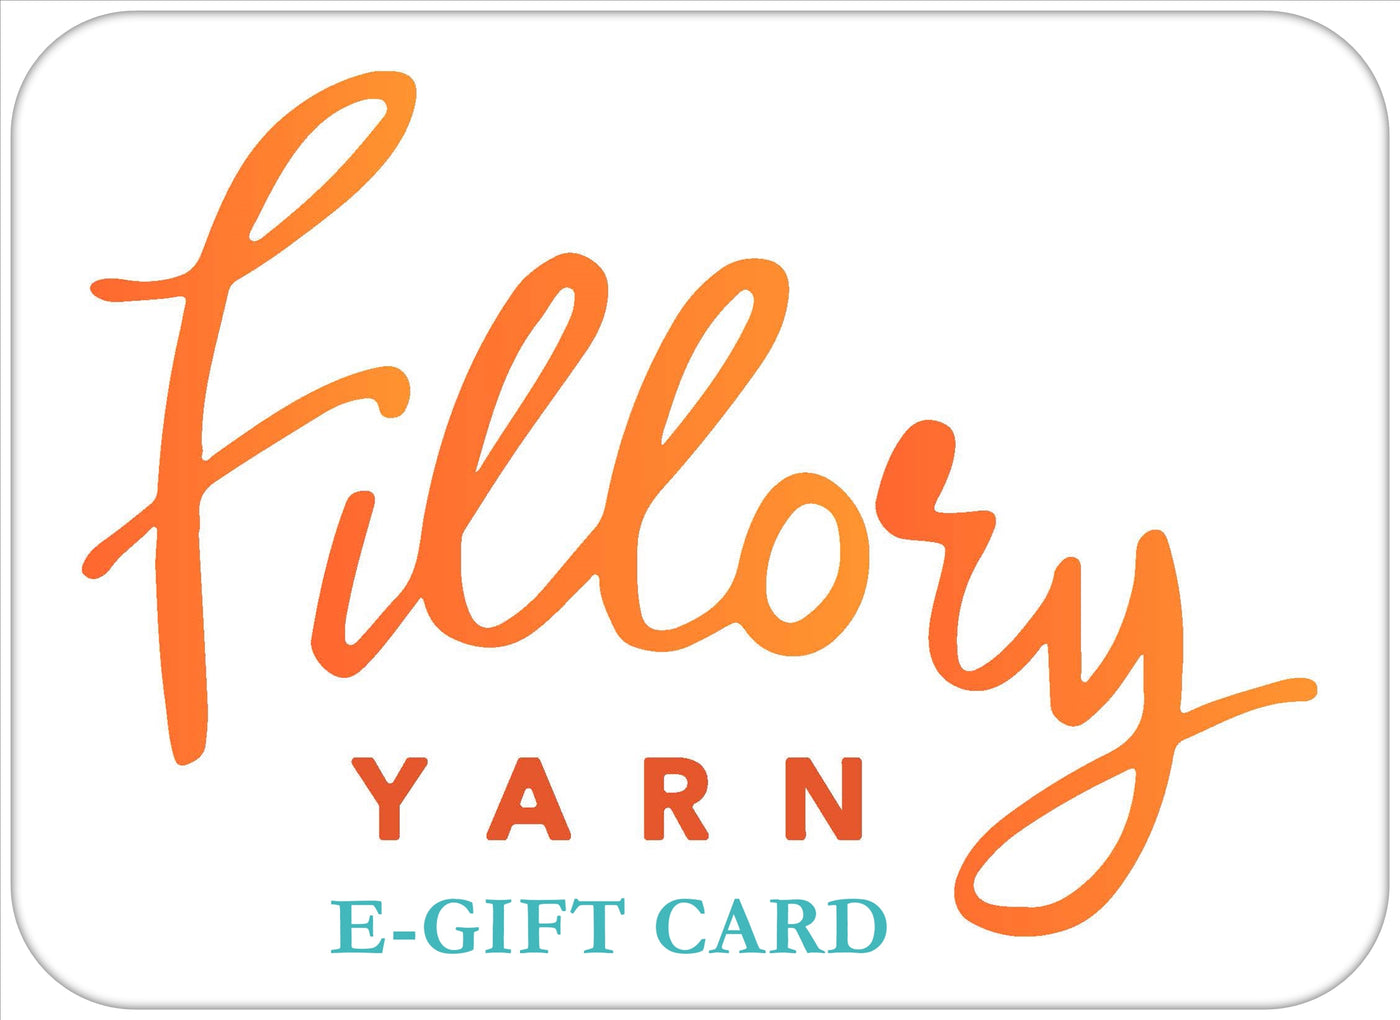 Electronic Gift Card of $25 - Fillory Yarn